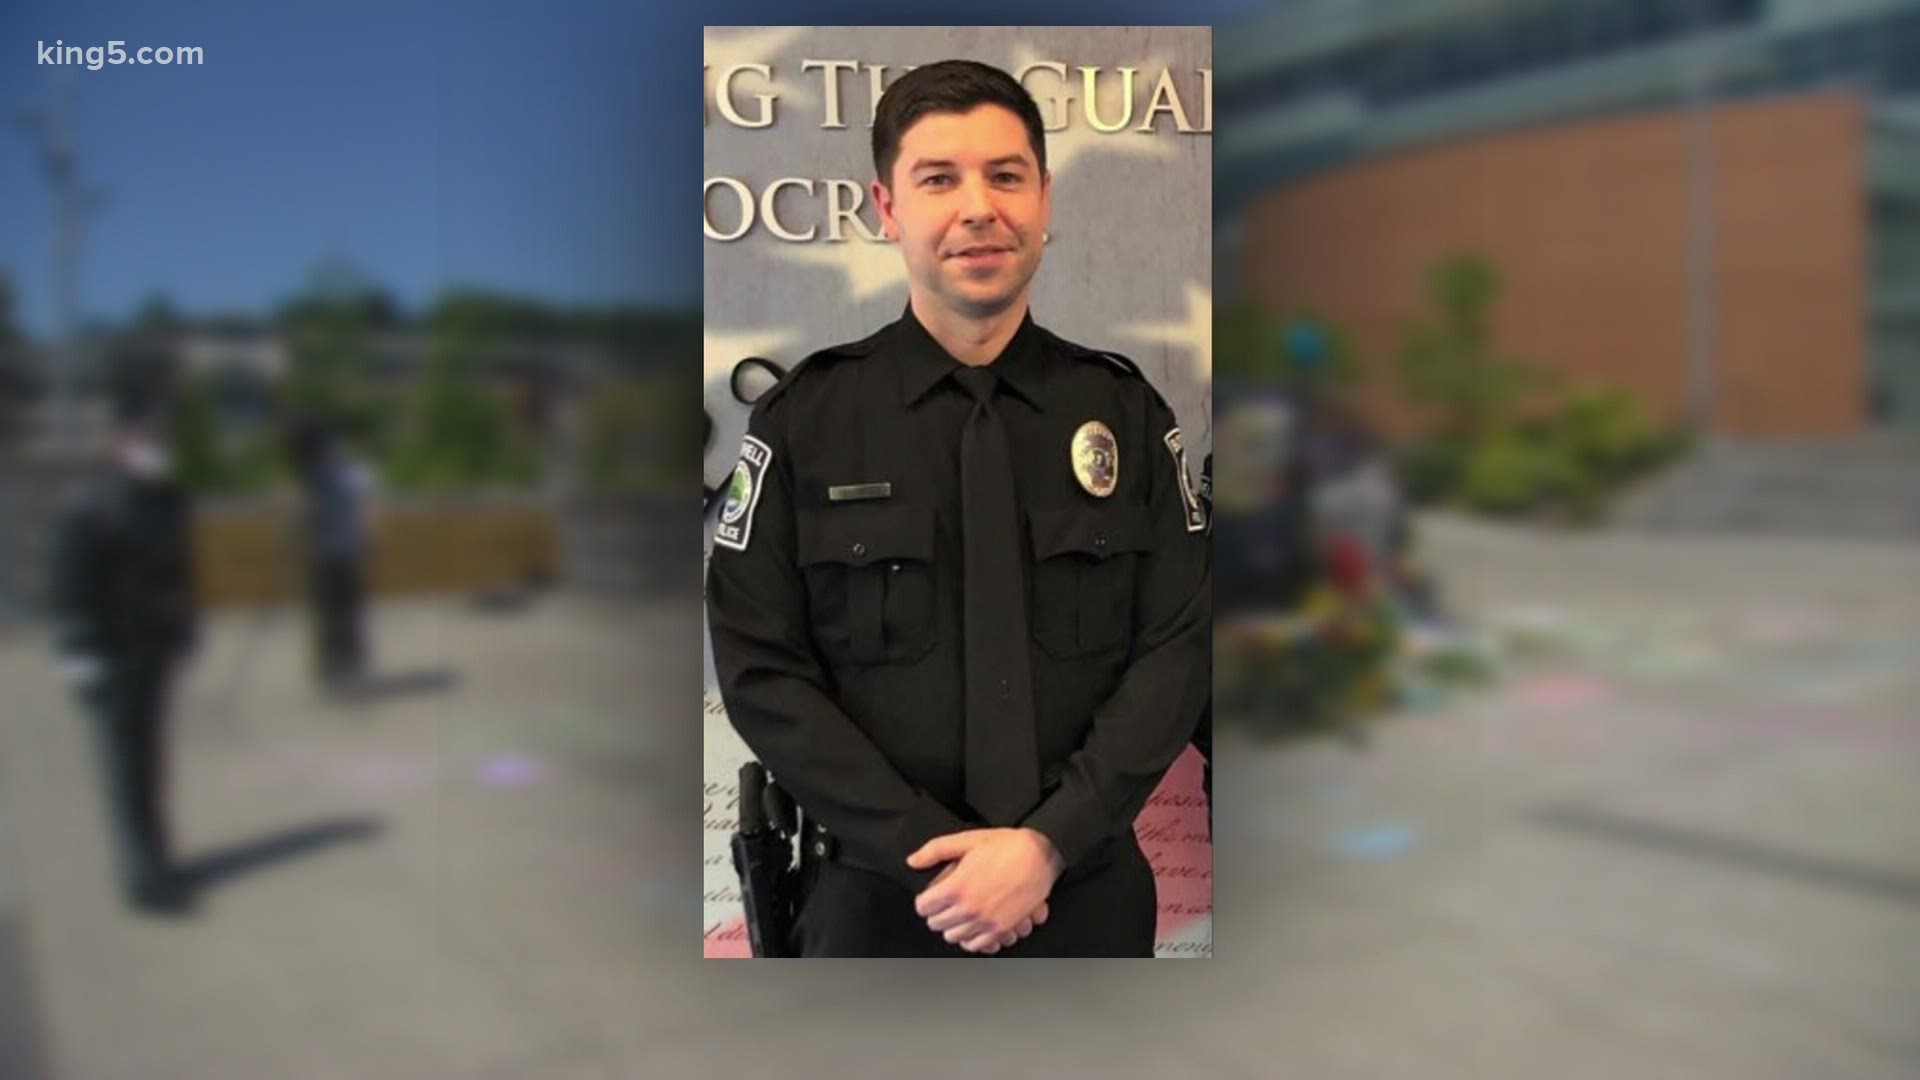 Bothell Police said Shoop joined their department after serving with the U.S. Coast Guard. He is survived by his fiancée, mother and two brothers.